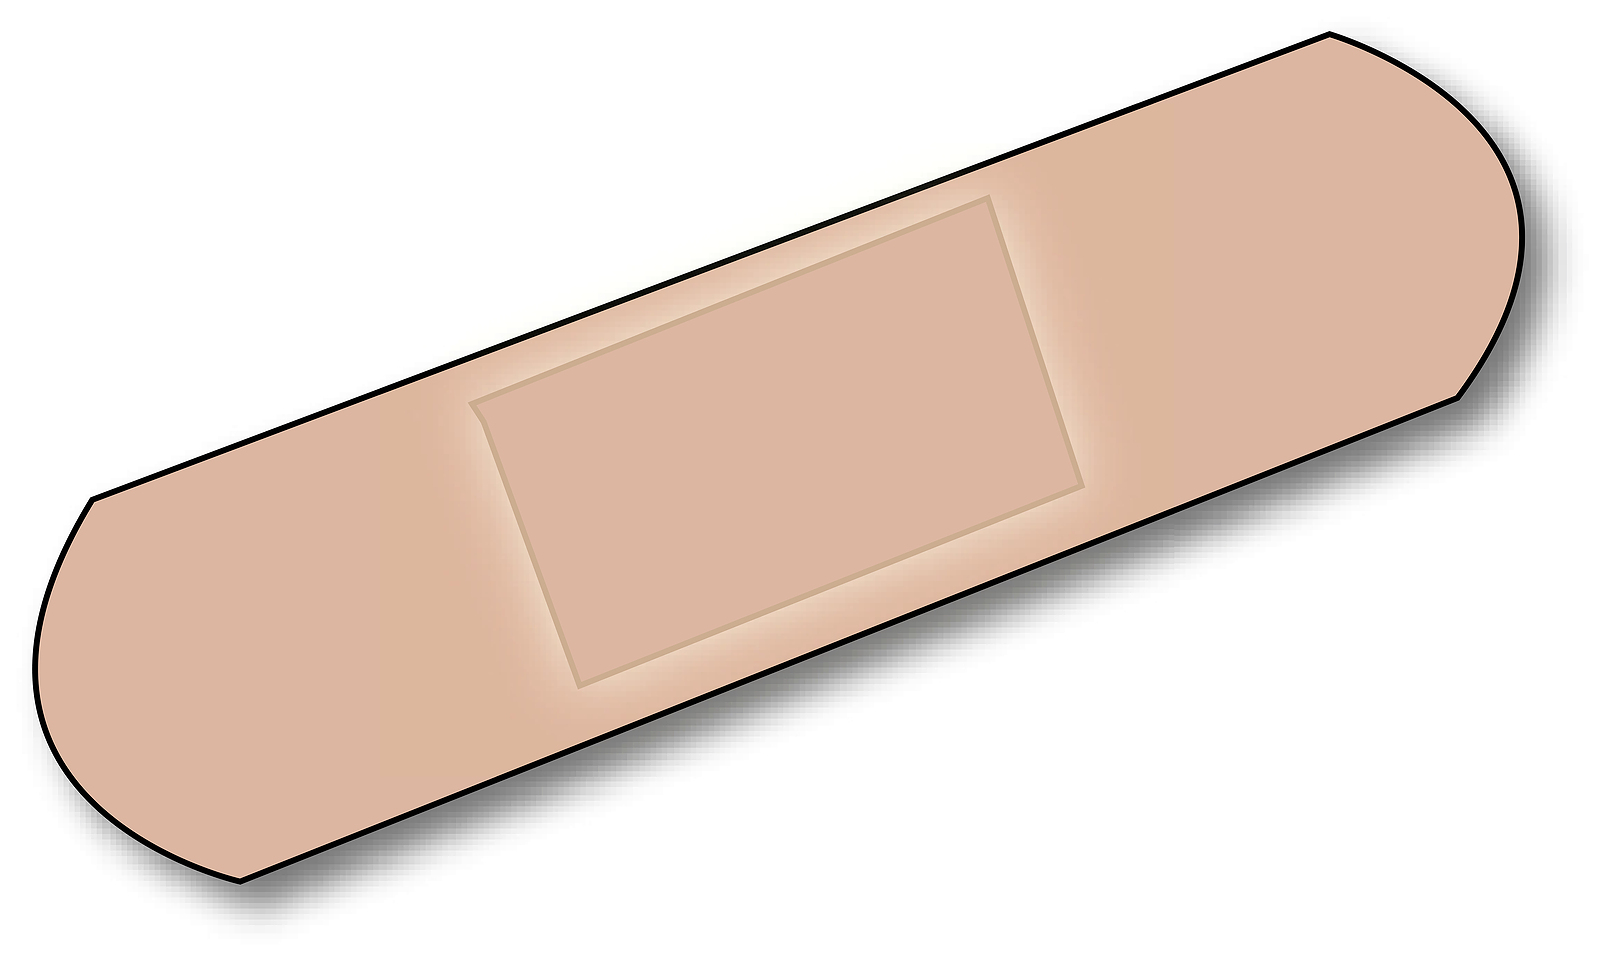 Bandaid band aid outline clipart image #25547